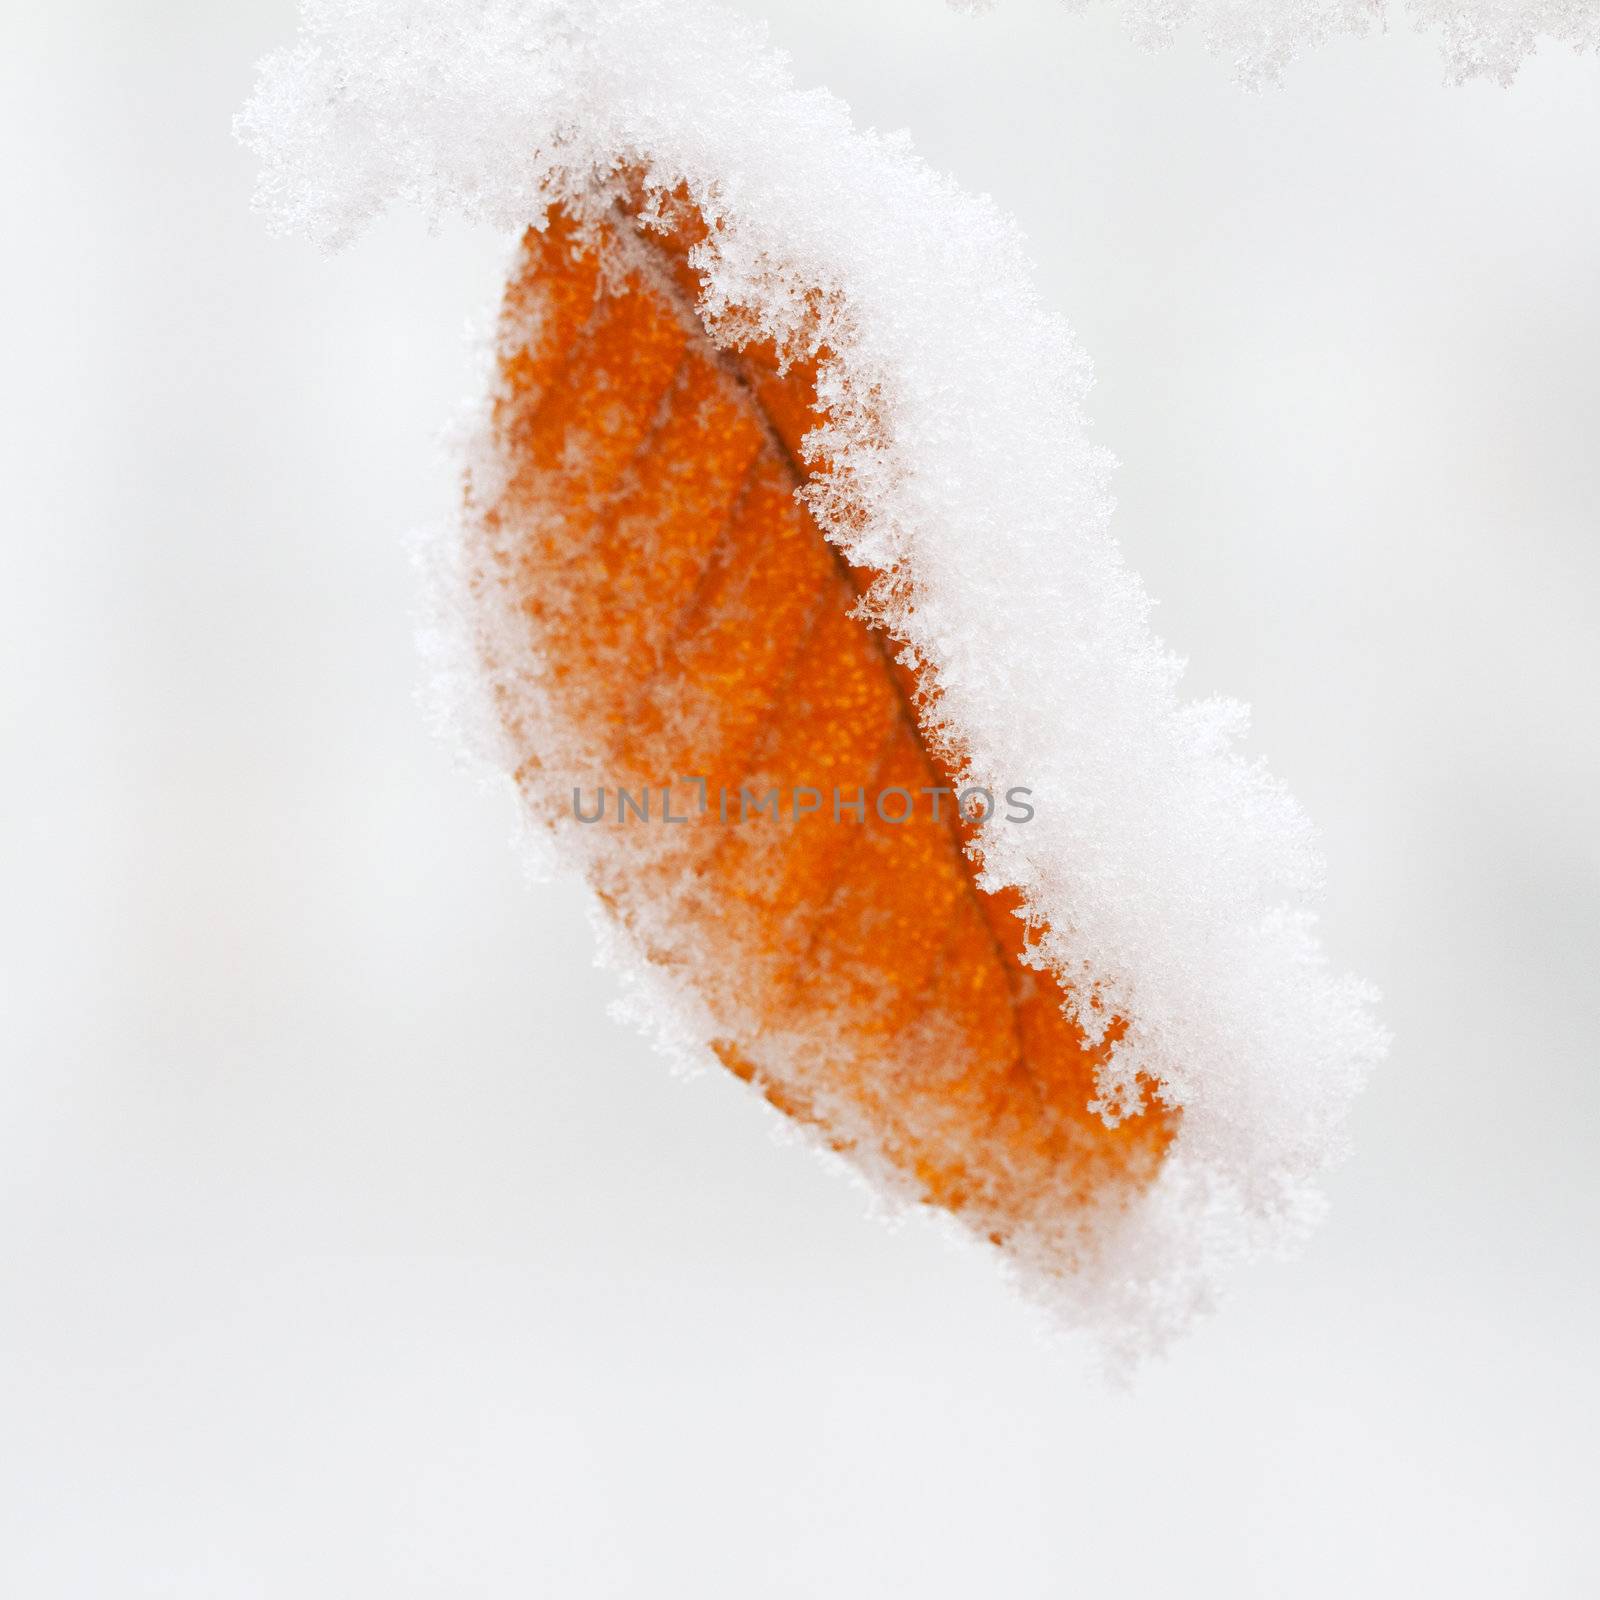 White snow on a red leaf, over gray sky